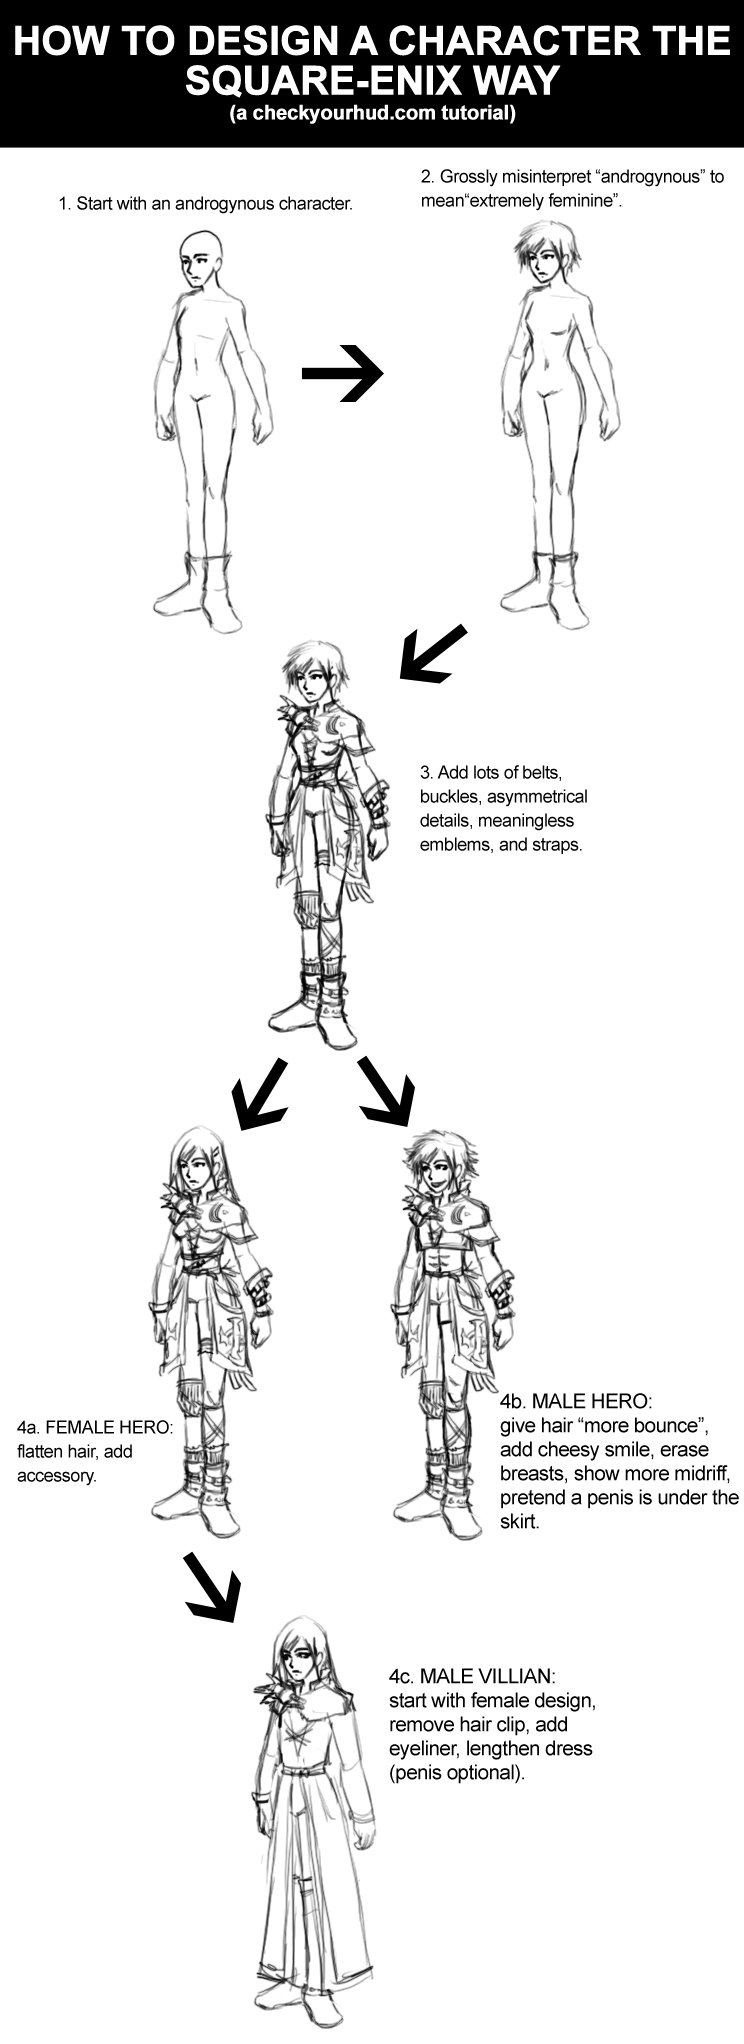 How to Design a Final Fantasy Character. found on stumble Edit: Wow thanks for my first top 40!. HOW TO DESIGN A CHARACTER THE IE, WAY 2. Grossly misinterpret "